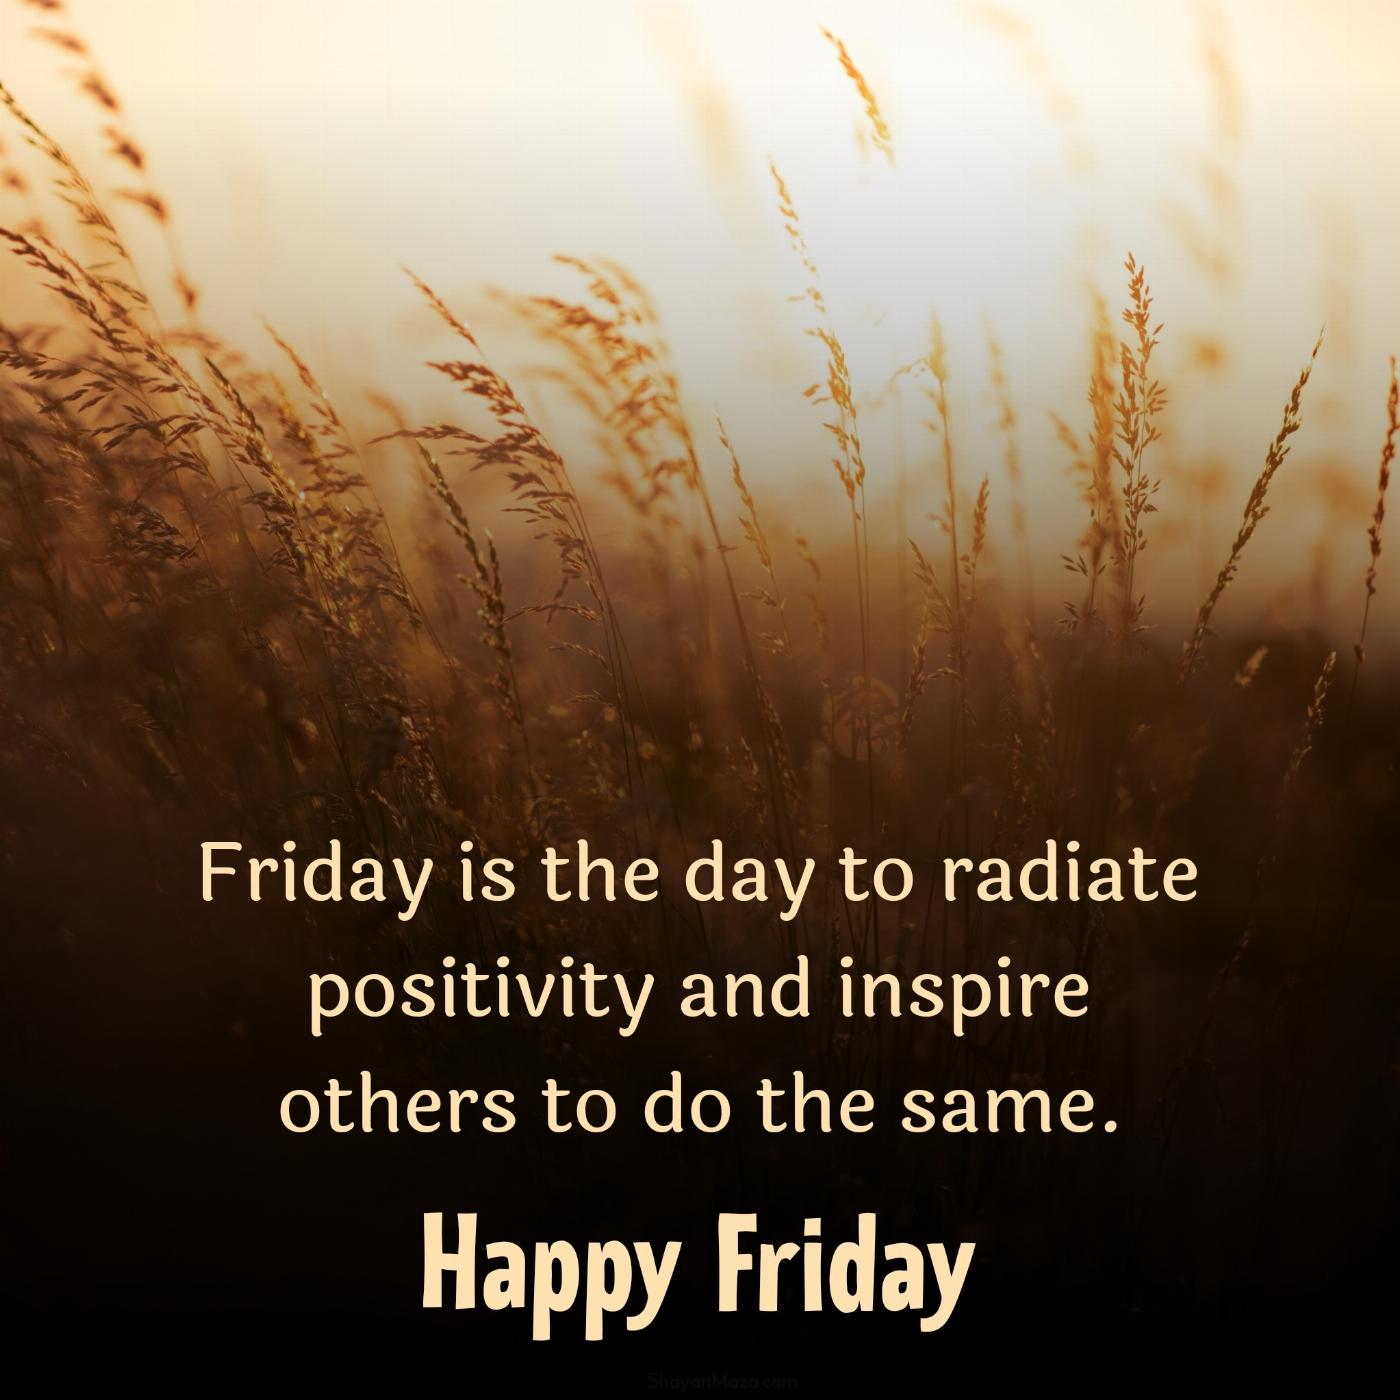 Friday is the day to radiate positivity and inspire others